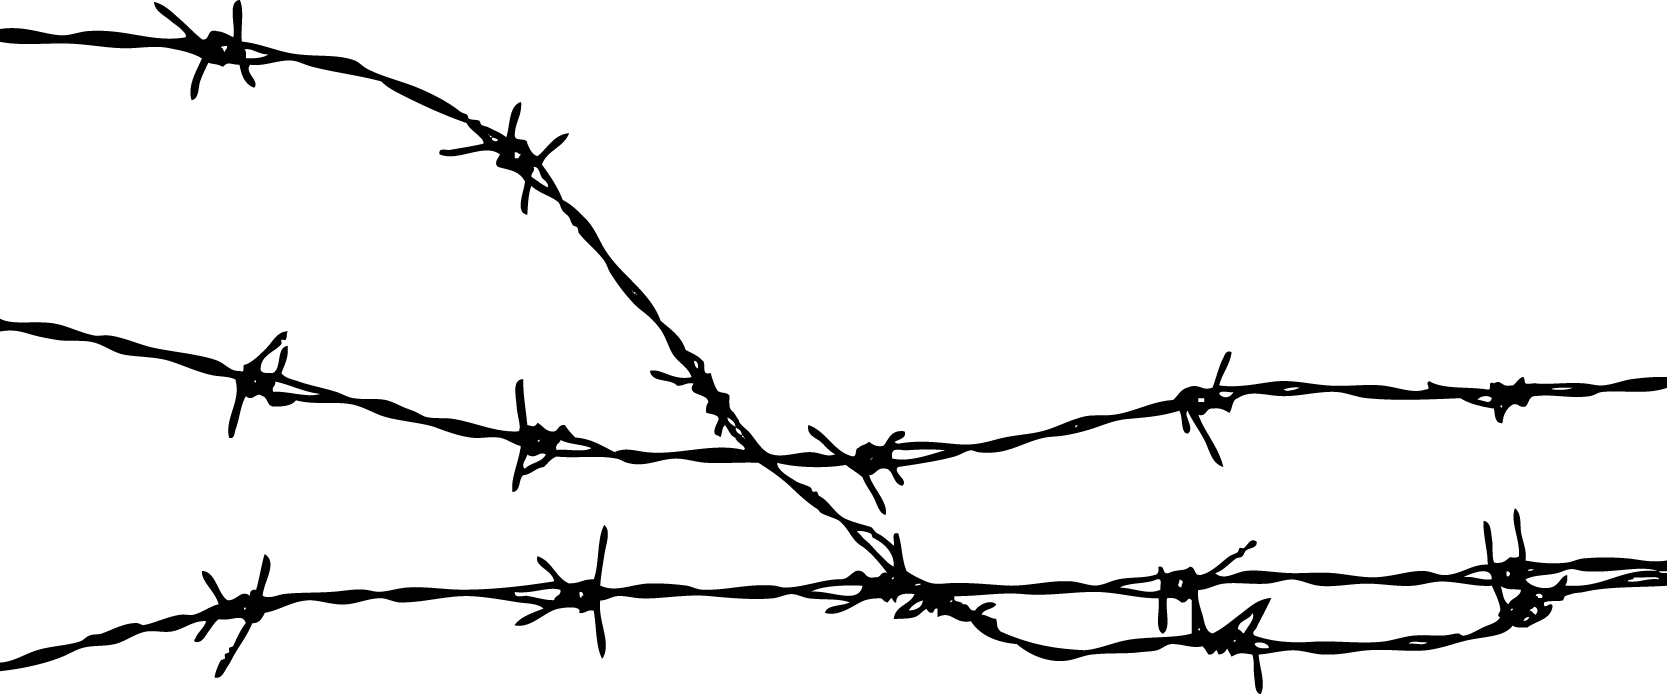 Barbwire - ClipArt Best